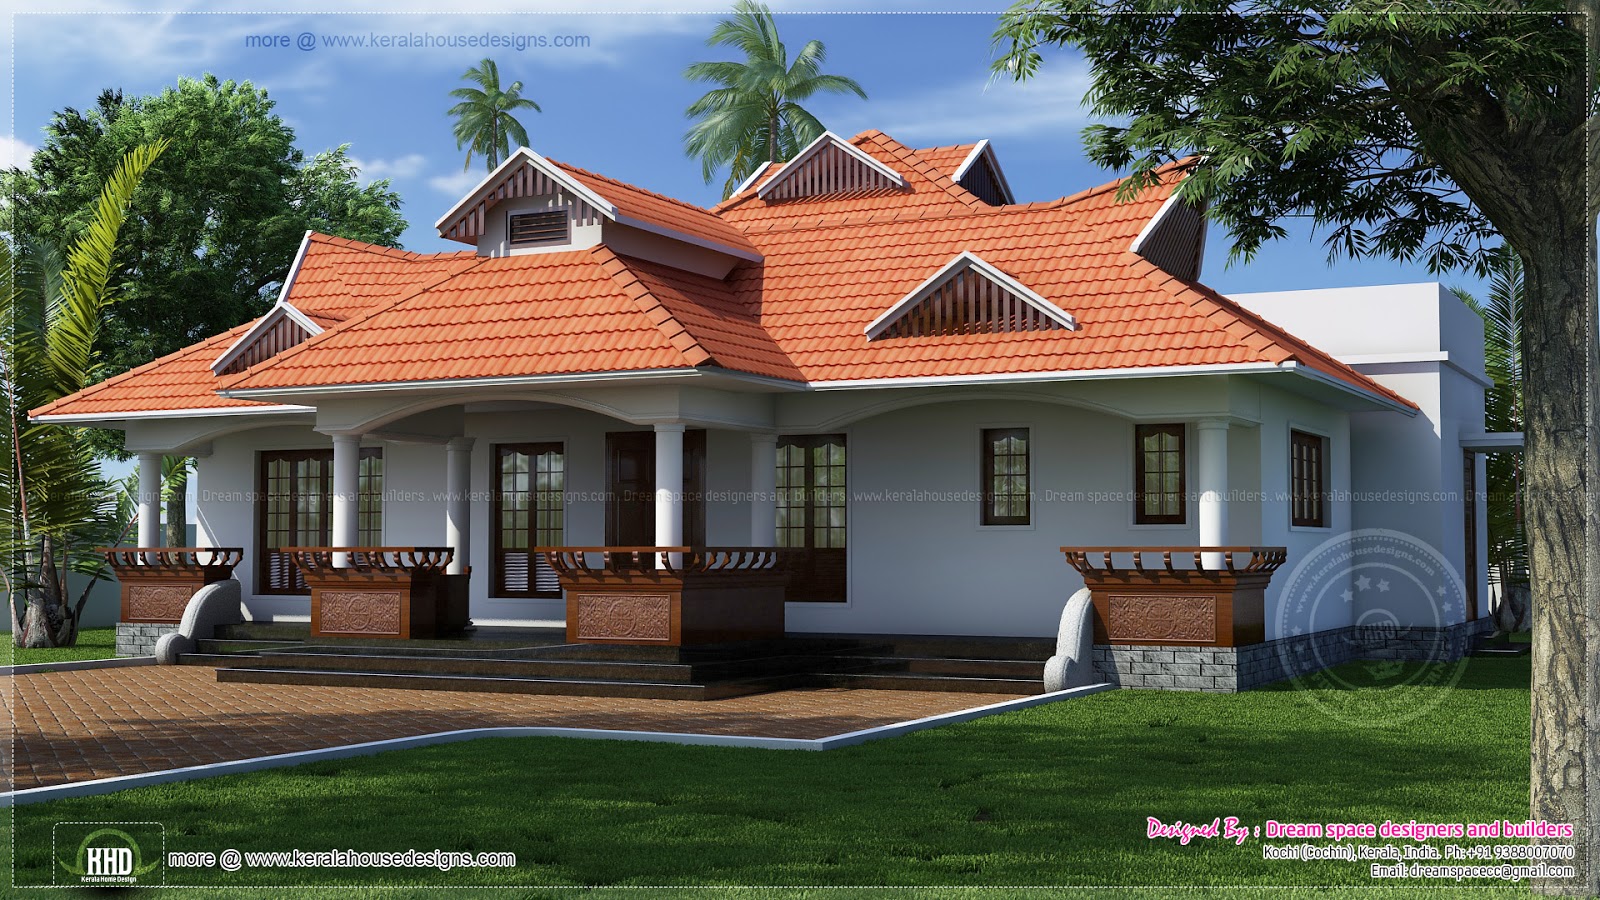 cents designed by dream space designers and builders kochi kerala